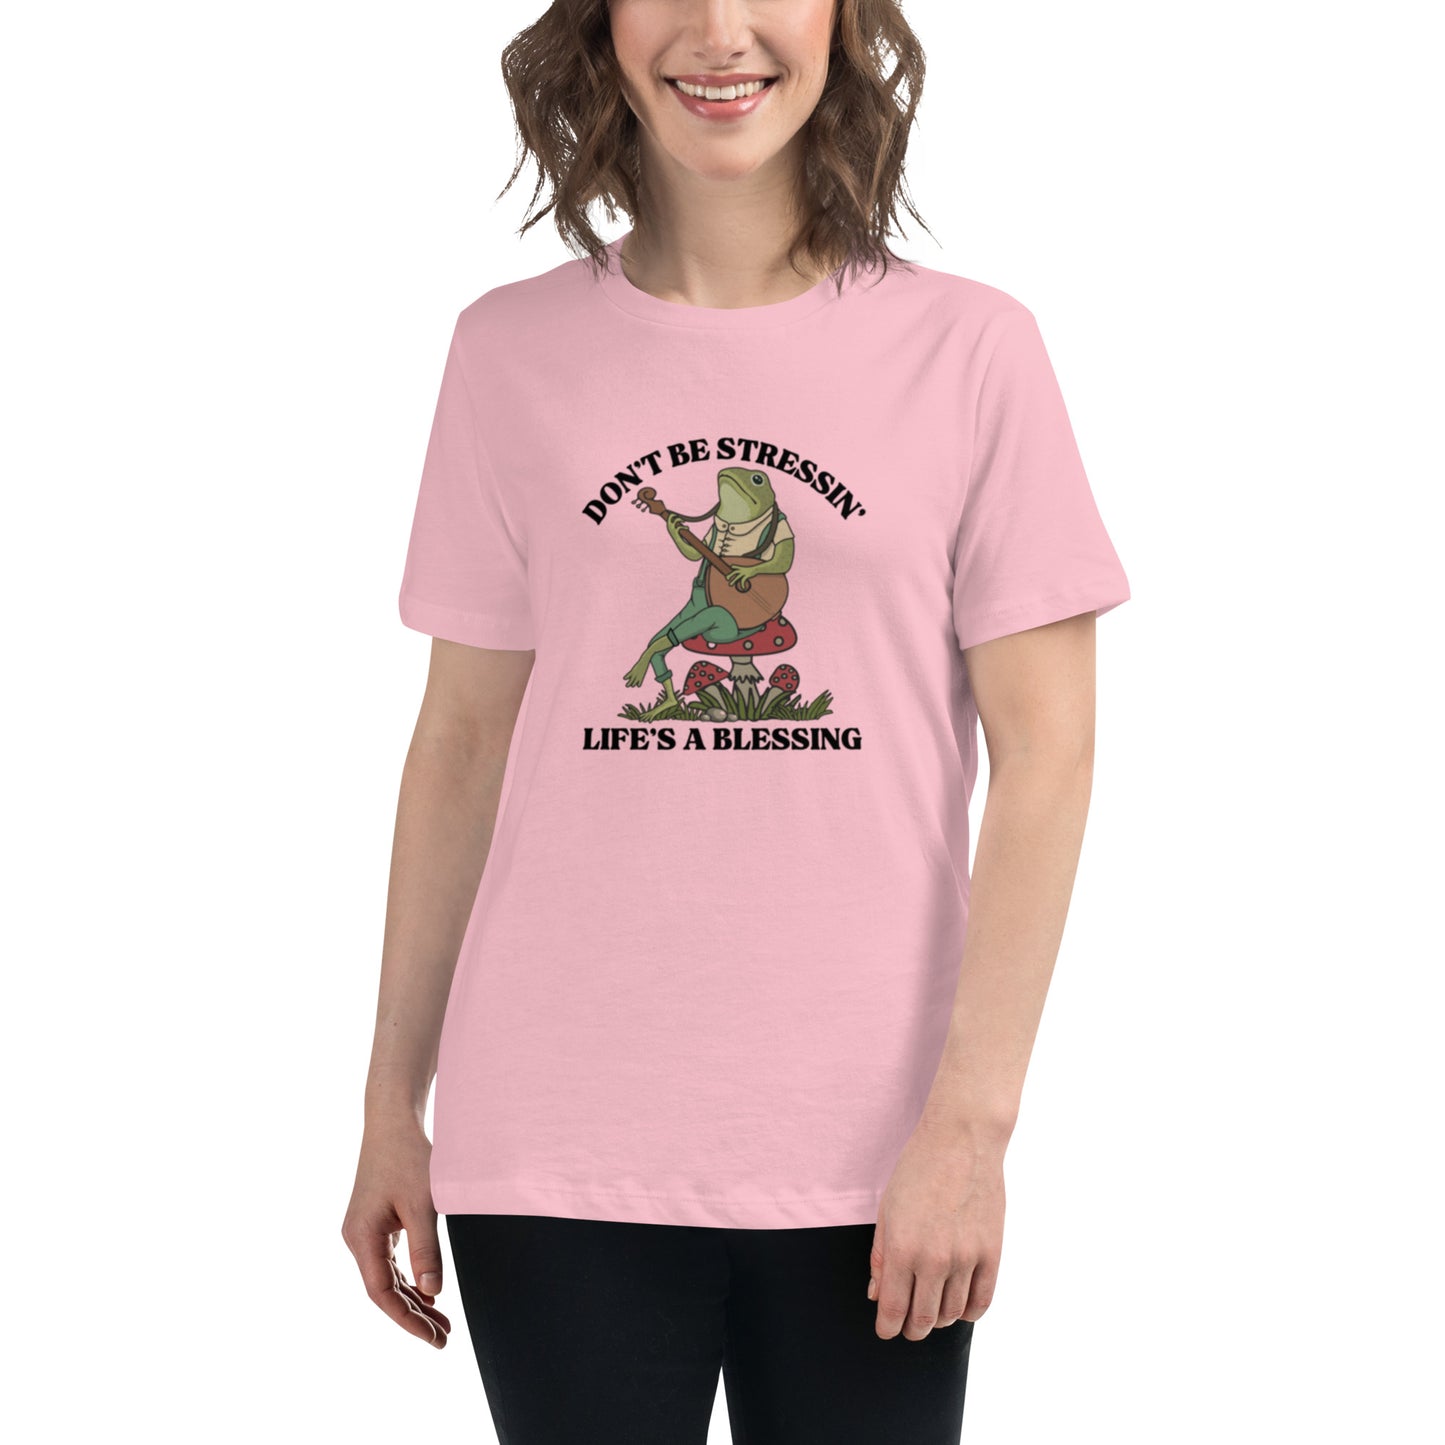 NARLA - Don't be Stressing - Women's Relaxed T-Shirt